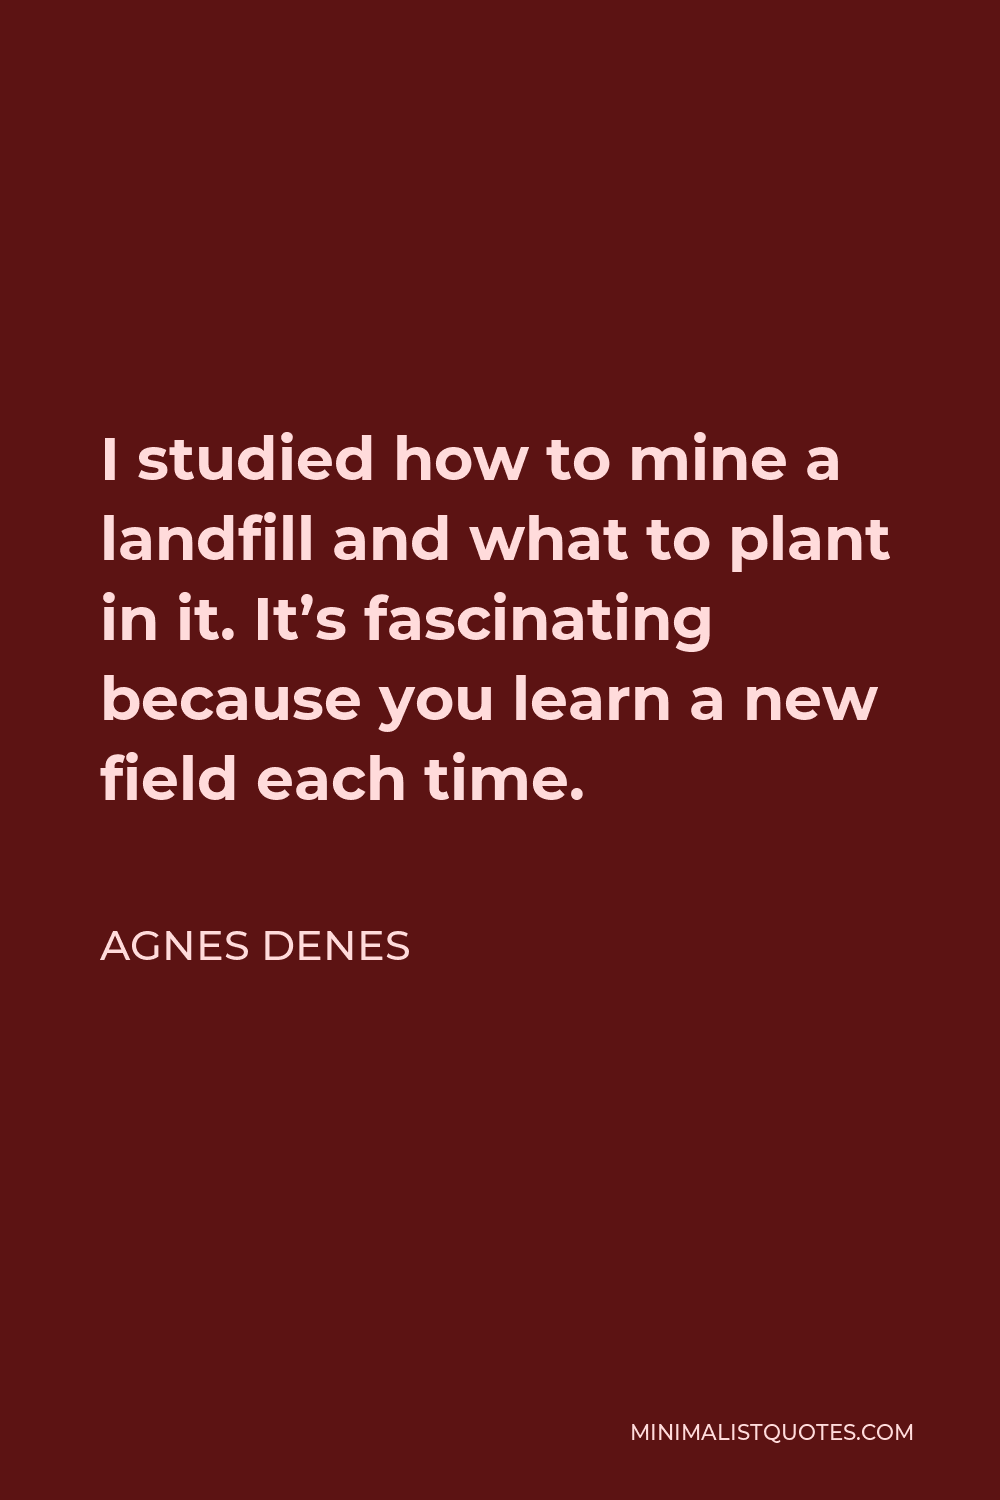 Agnes Denes Quote - I studied how to mine a landfill and what to plant in it. It’s fascinating because you learn a new field each time.